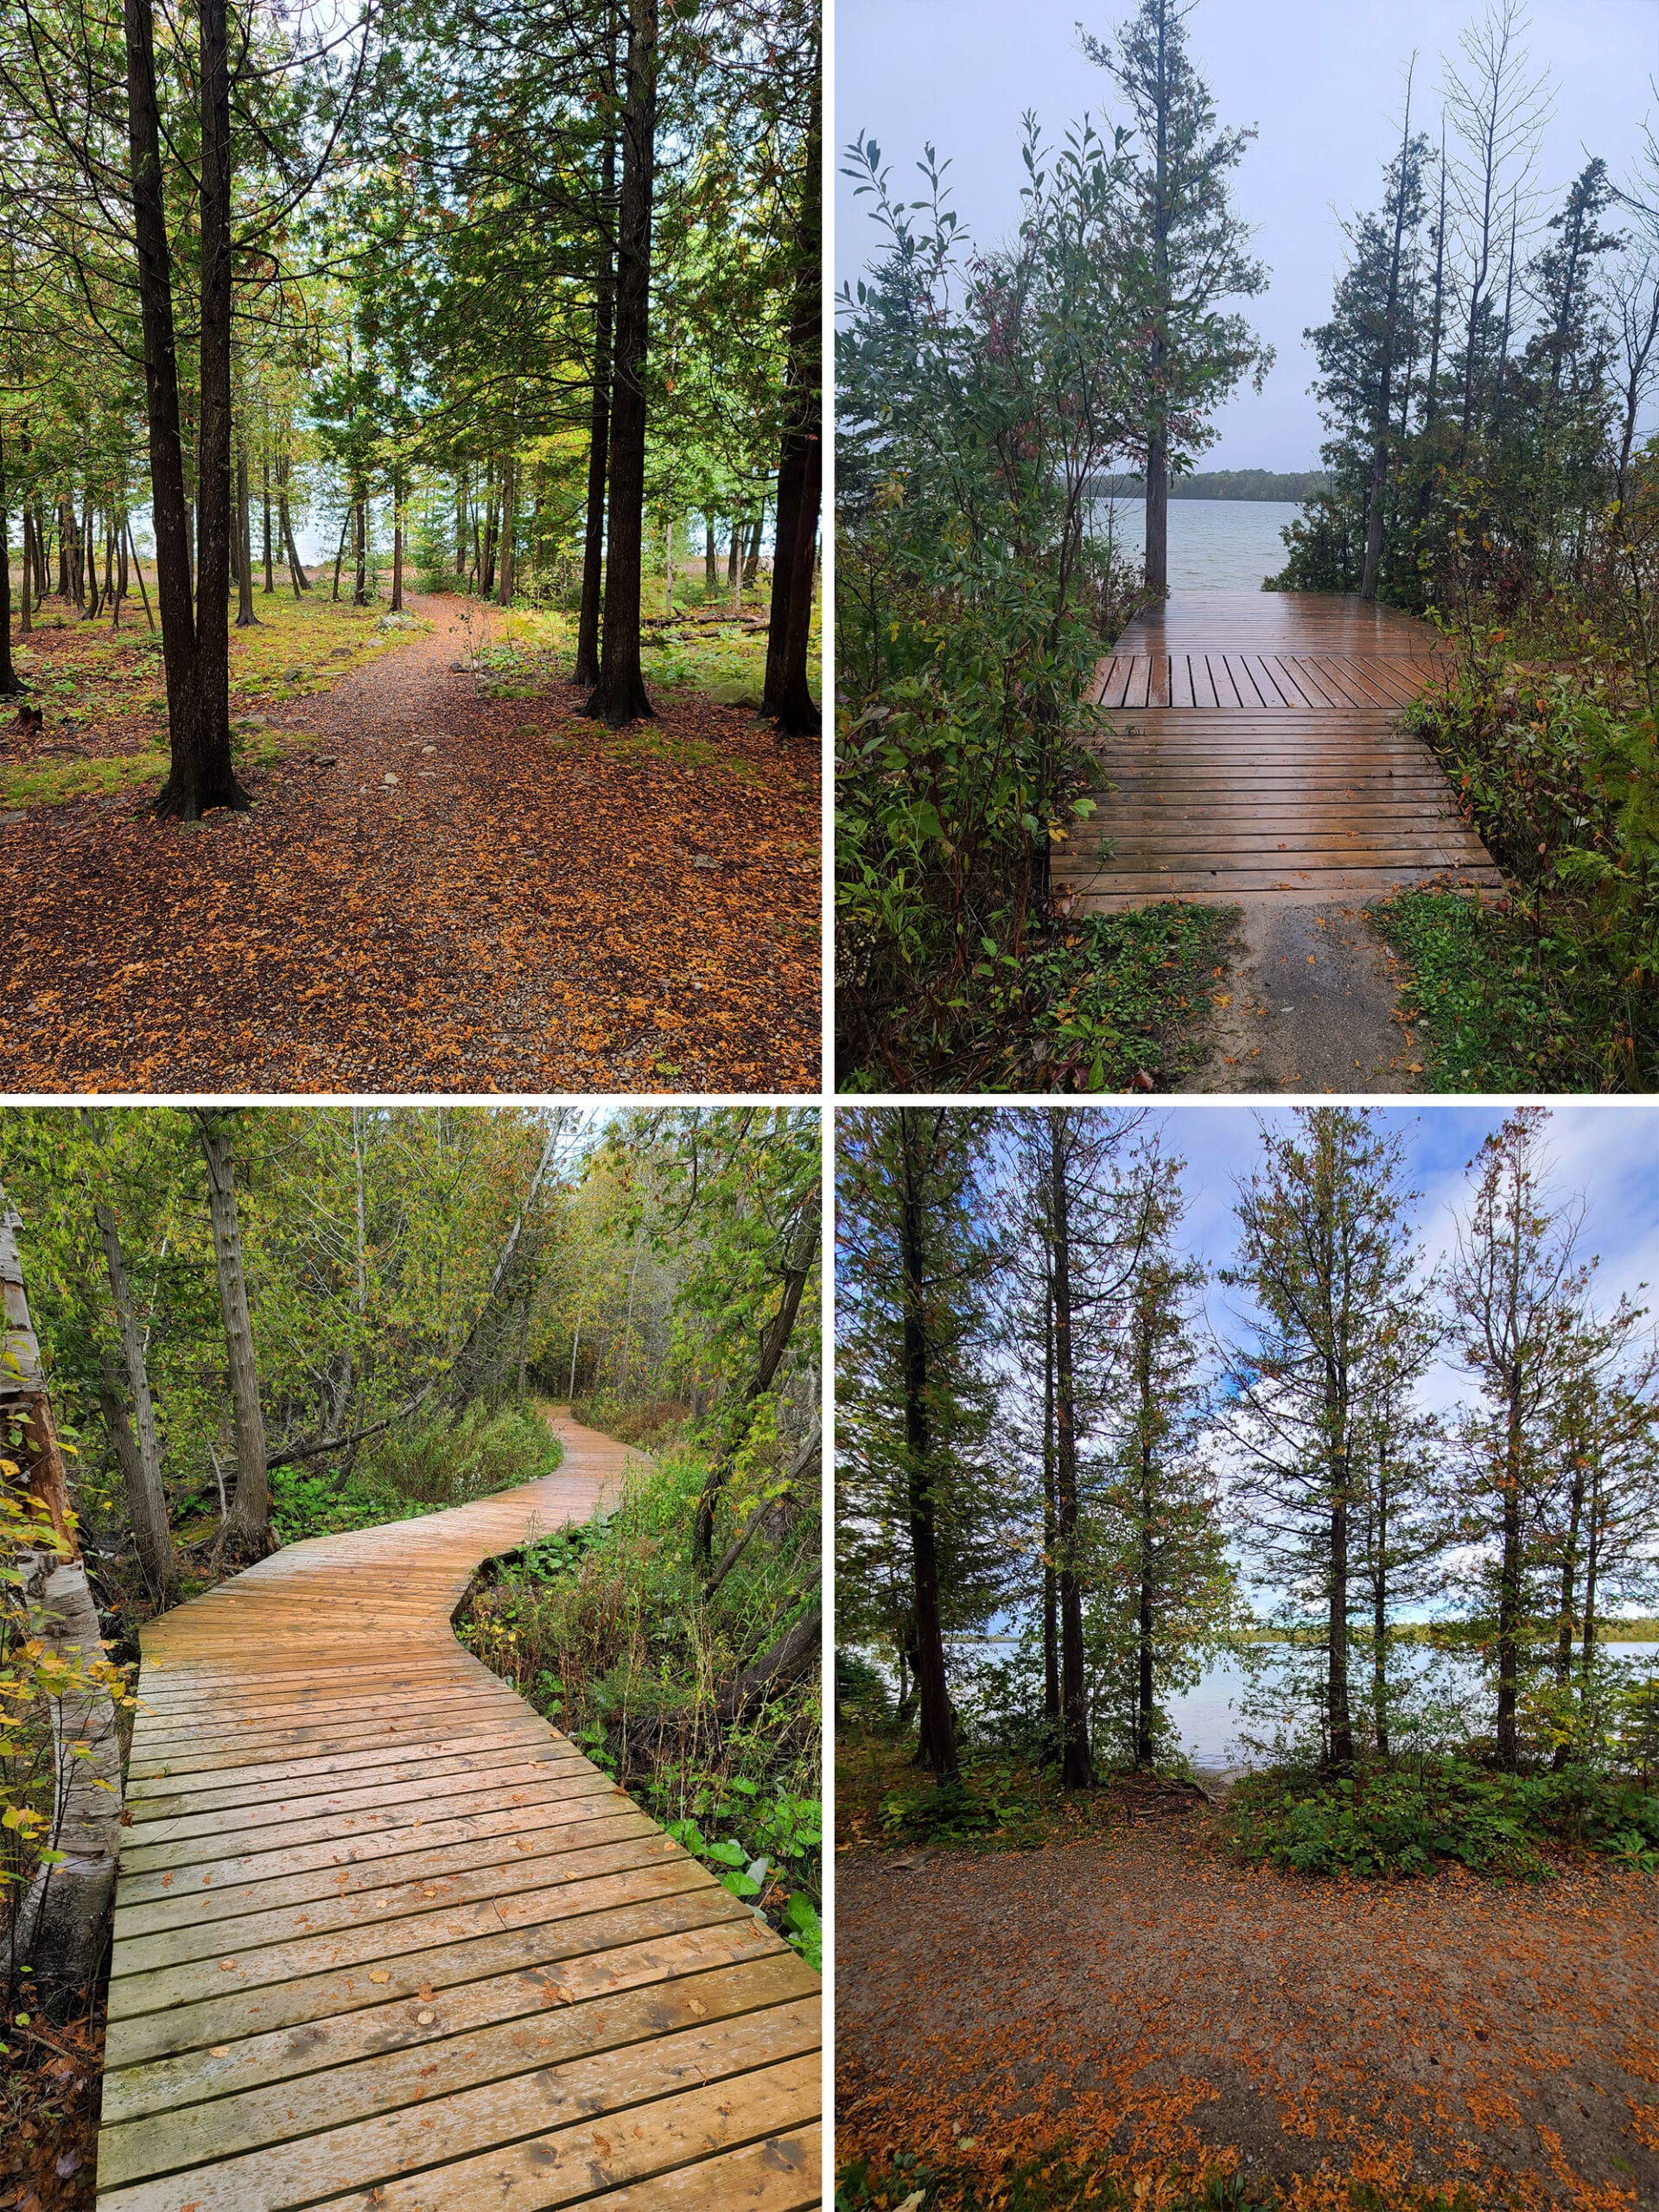 4 part image showing various views of cyprus lake trail, with a boardwalk and trees going around a small lake.